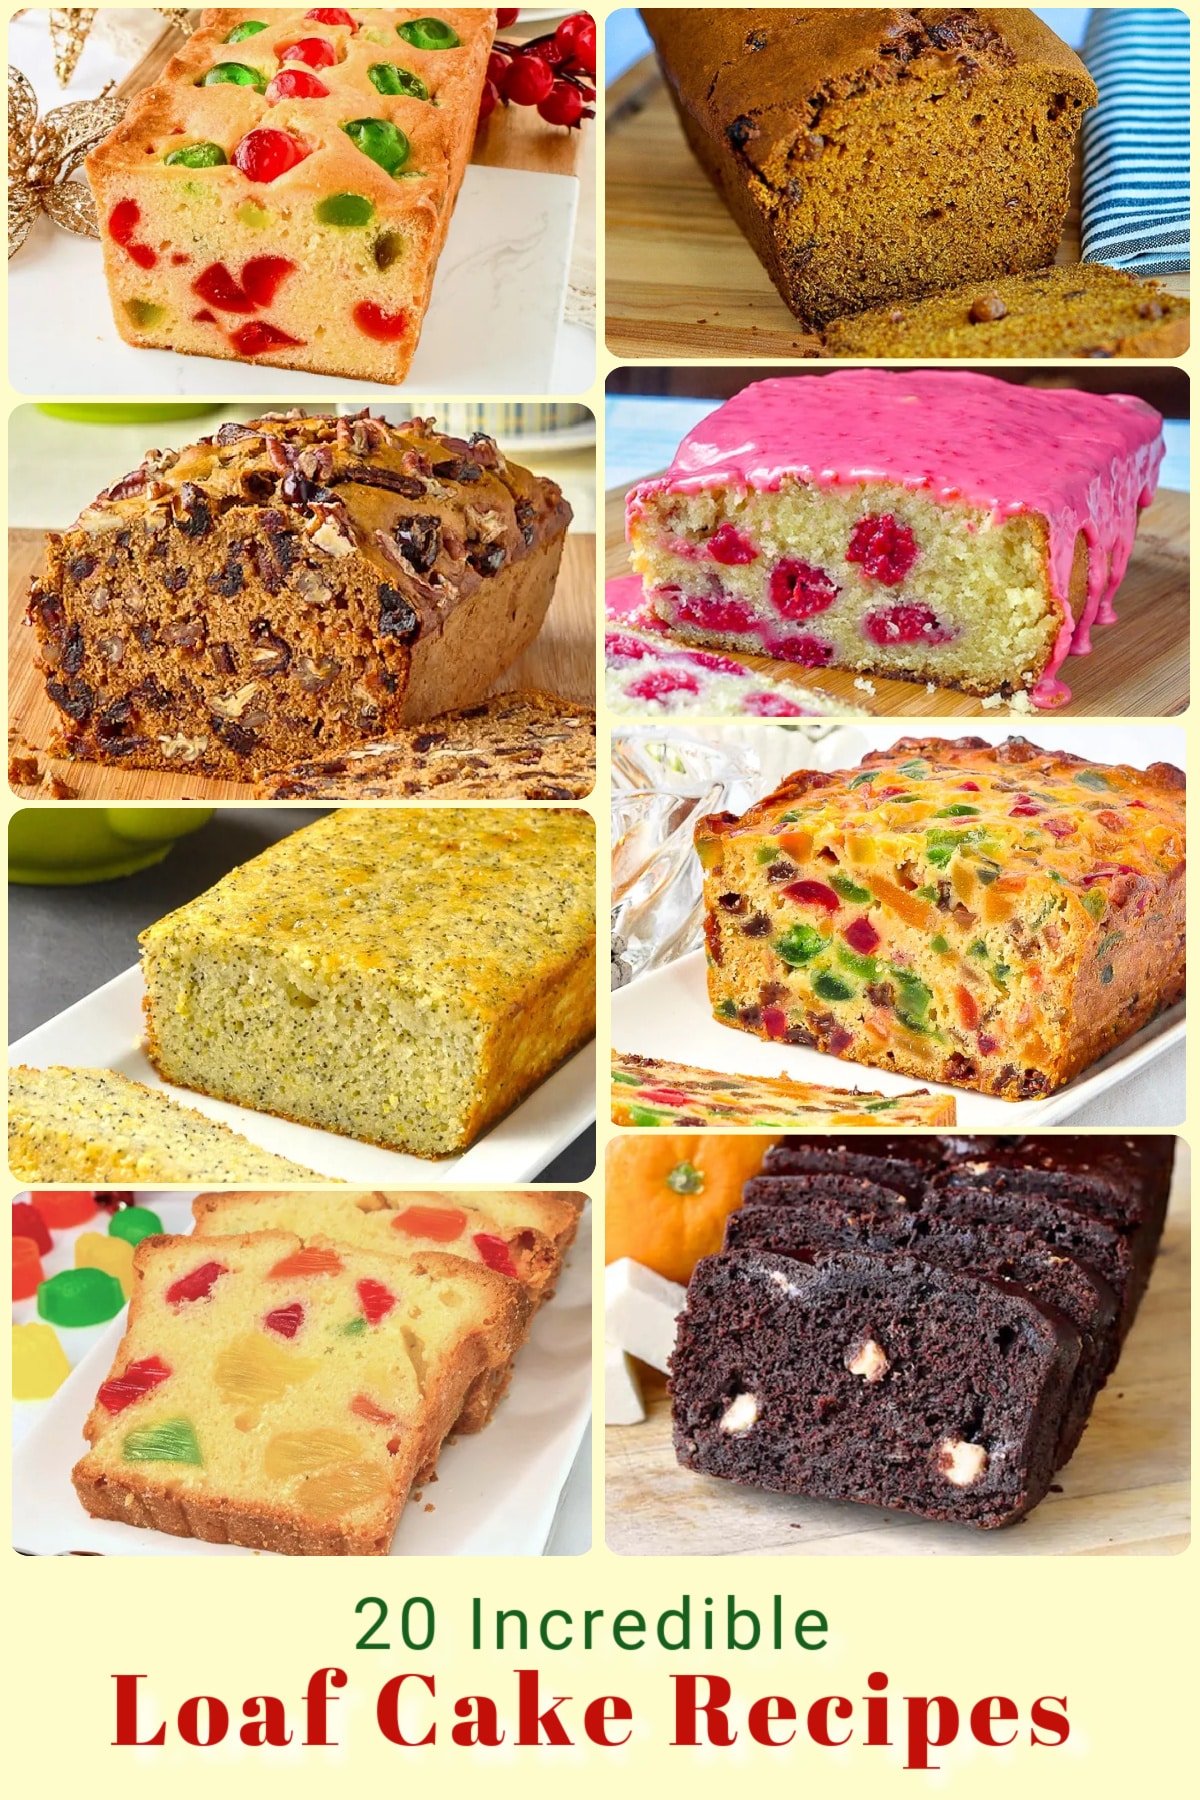 Best Loaf Cake Recipes photo collage for Pinterest